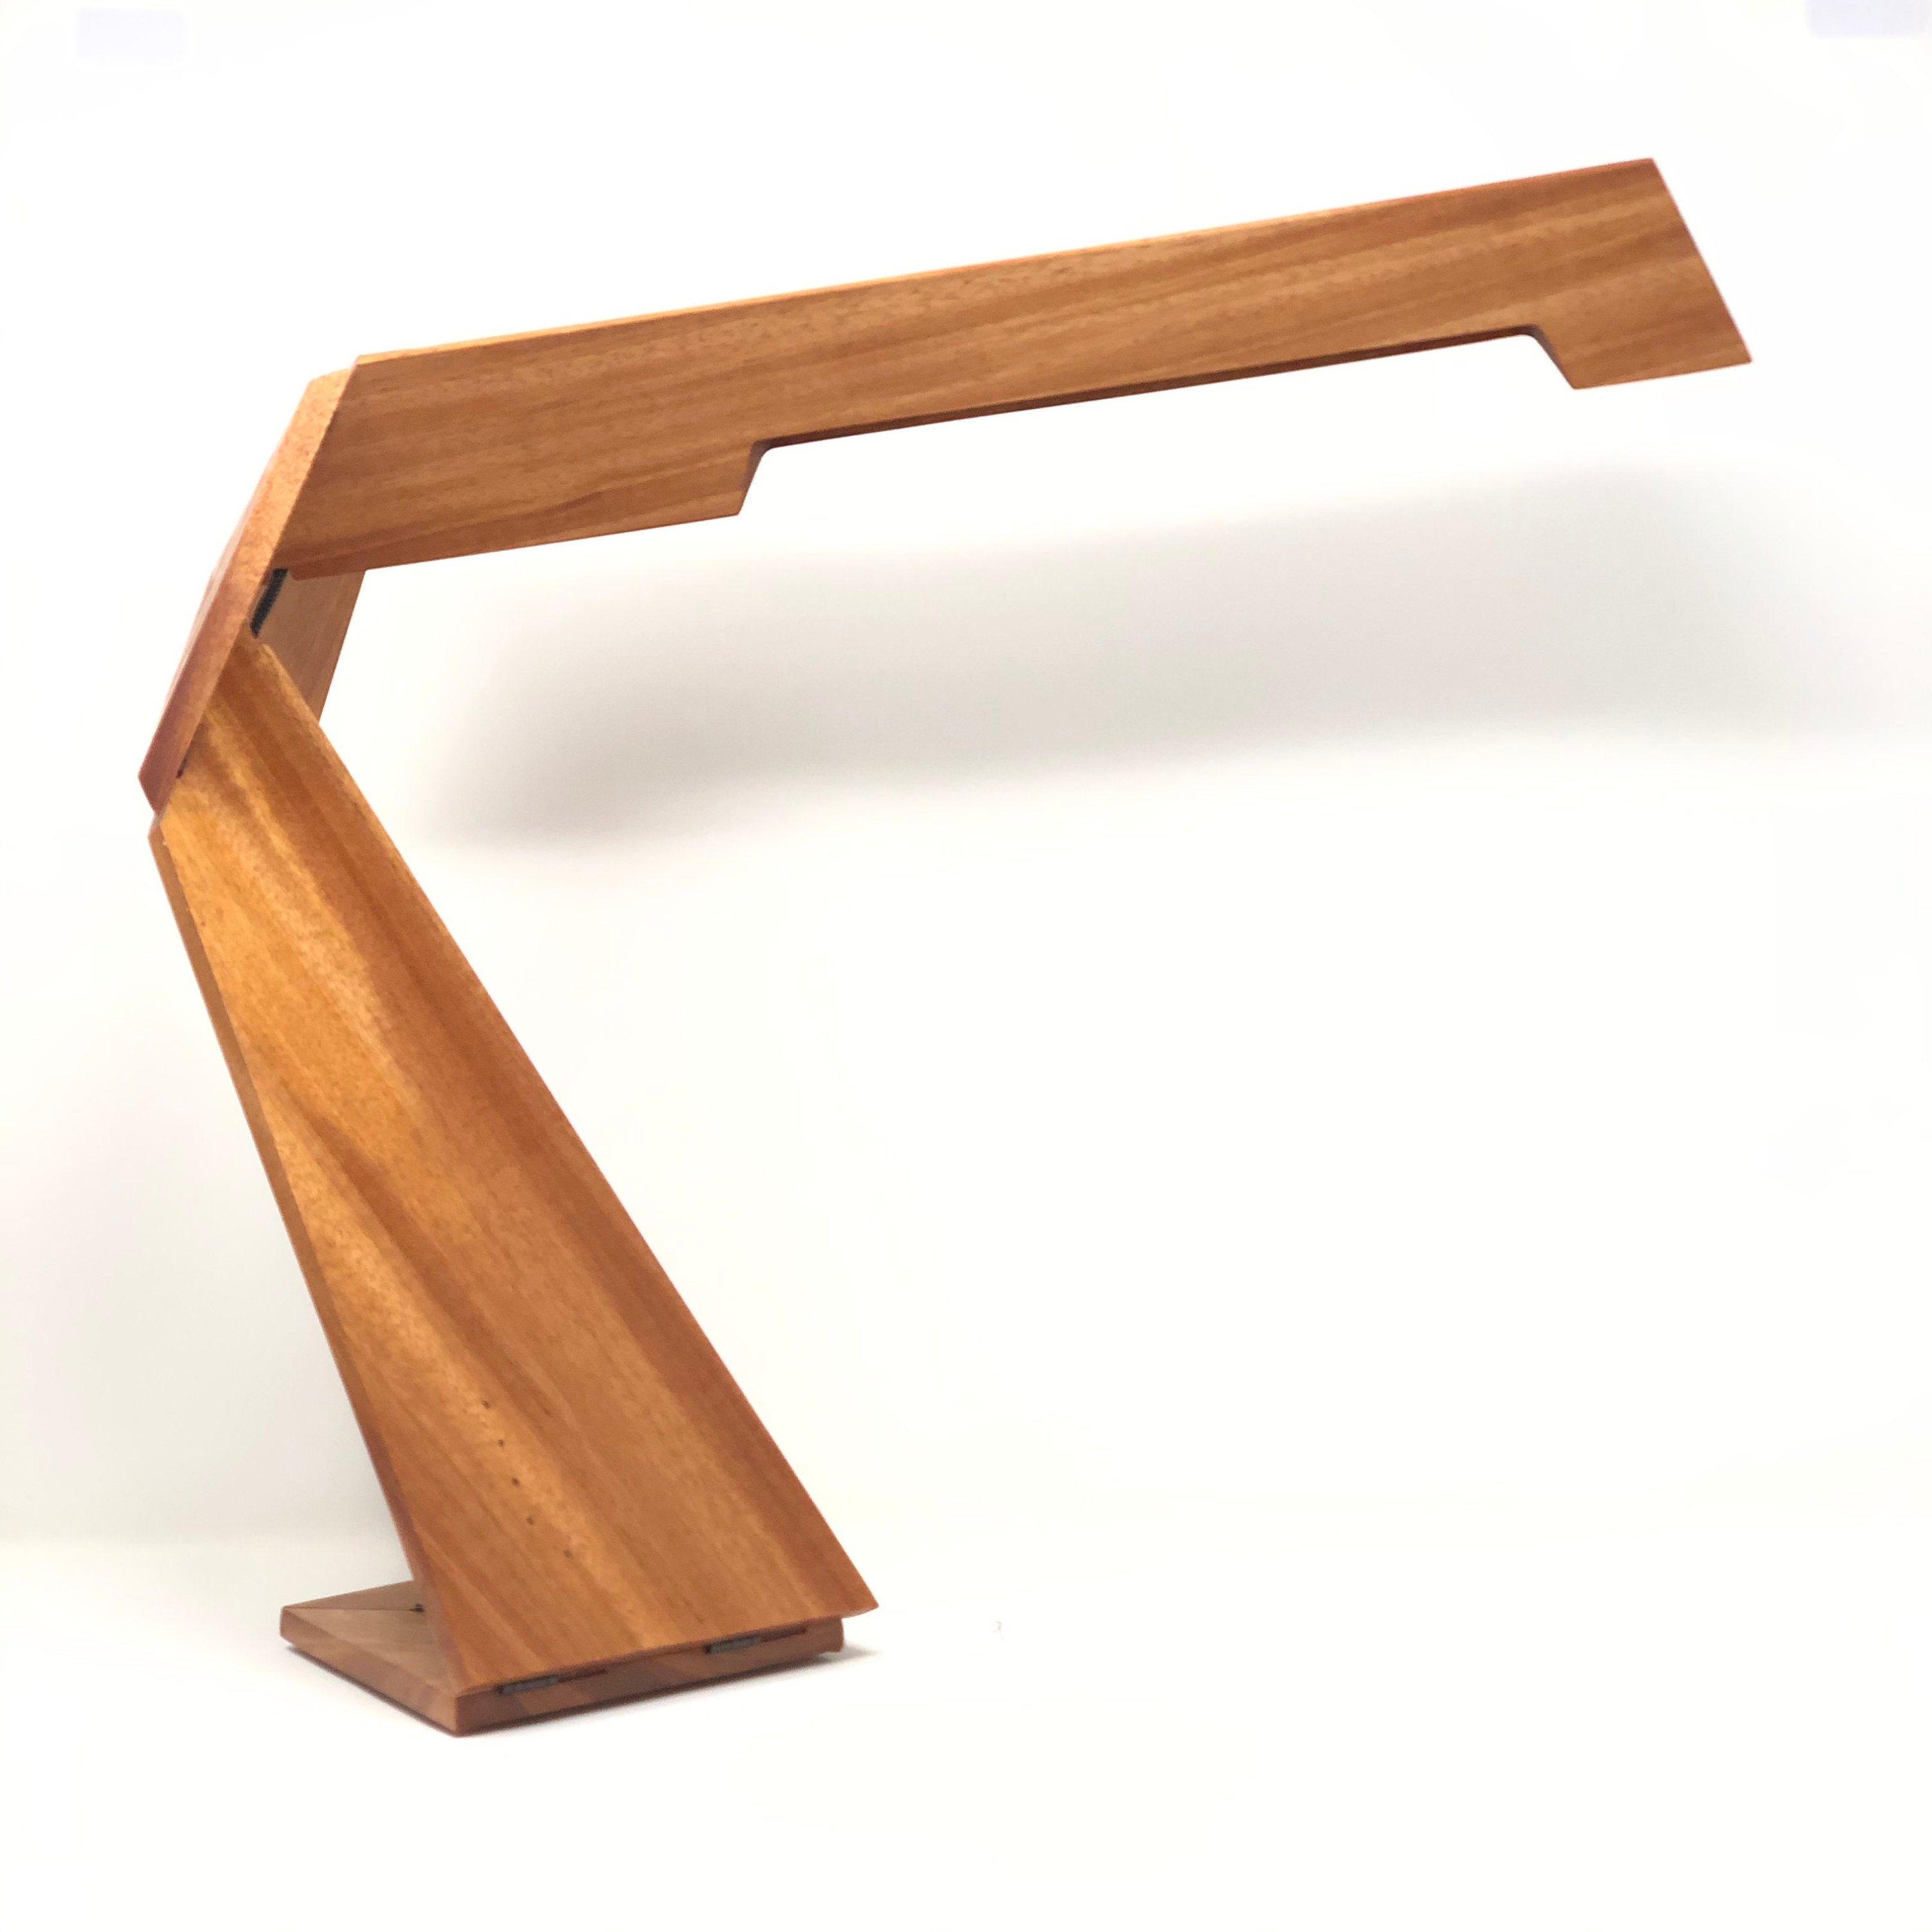 Kinetic Desk Lamp - First Limited Edition - Number 9 of 9 in Solid Sapele